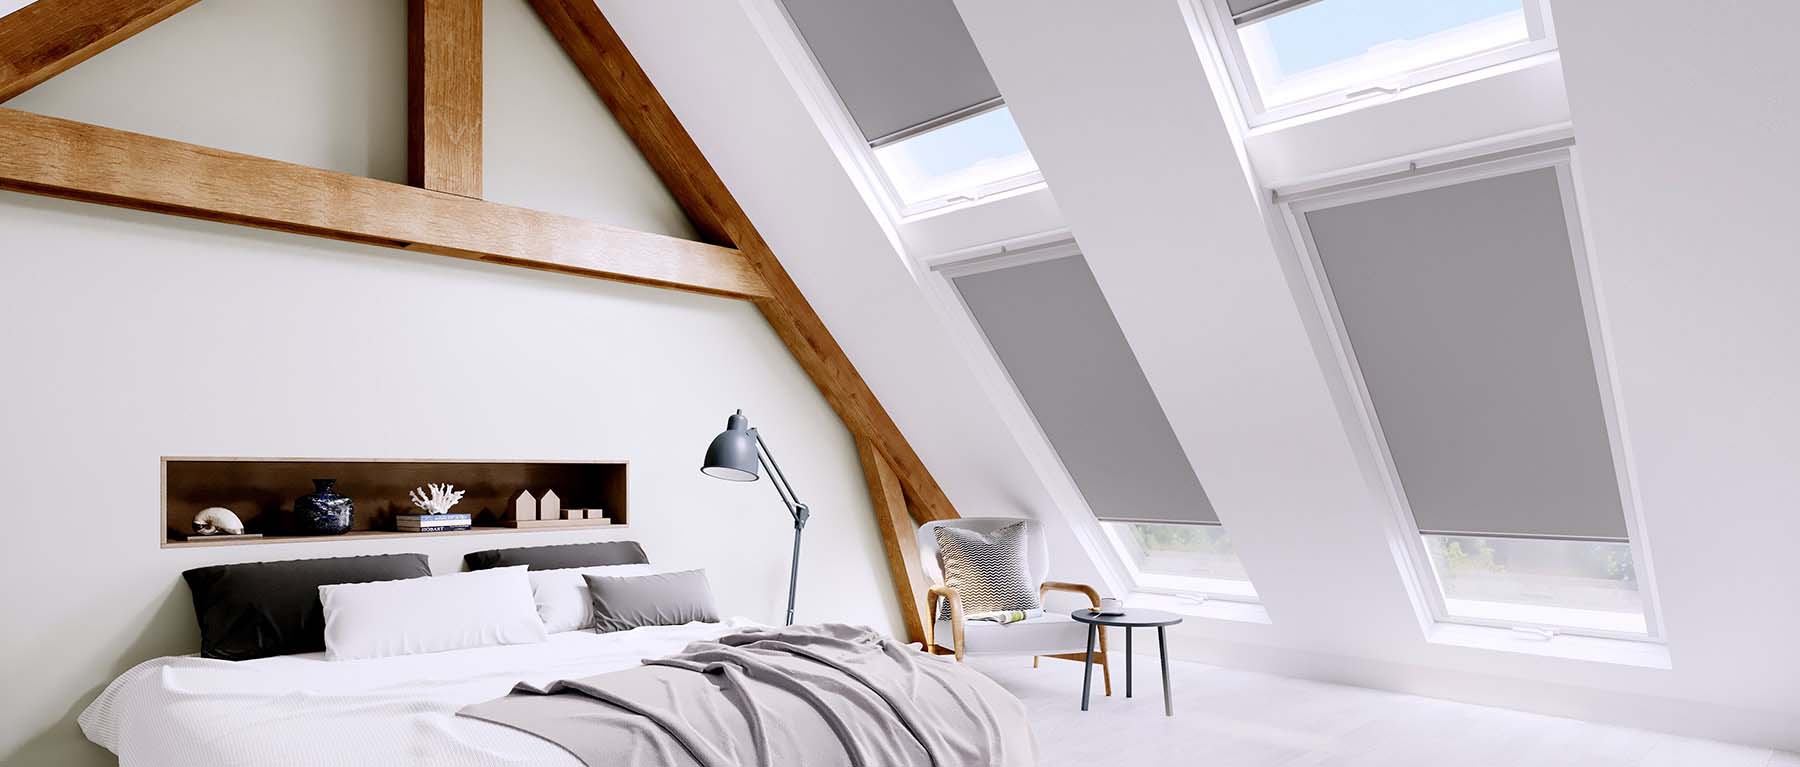 Velux Blinds from Blinds Of All Kinds